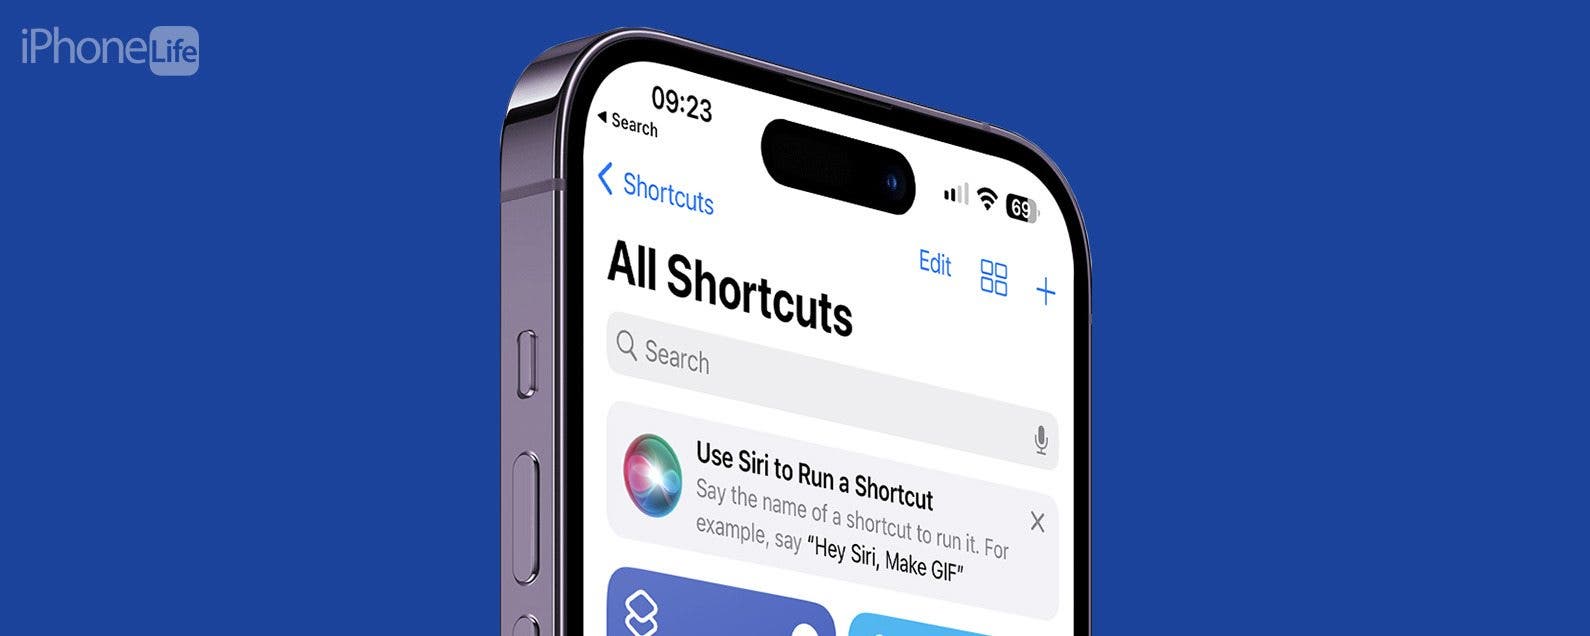 How to Make a Shortcut on iPhone Quickly & Easily (iOS 16)